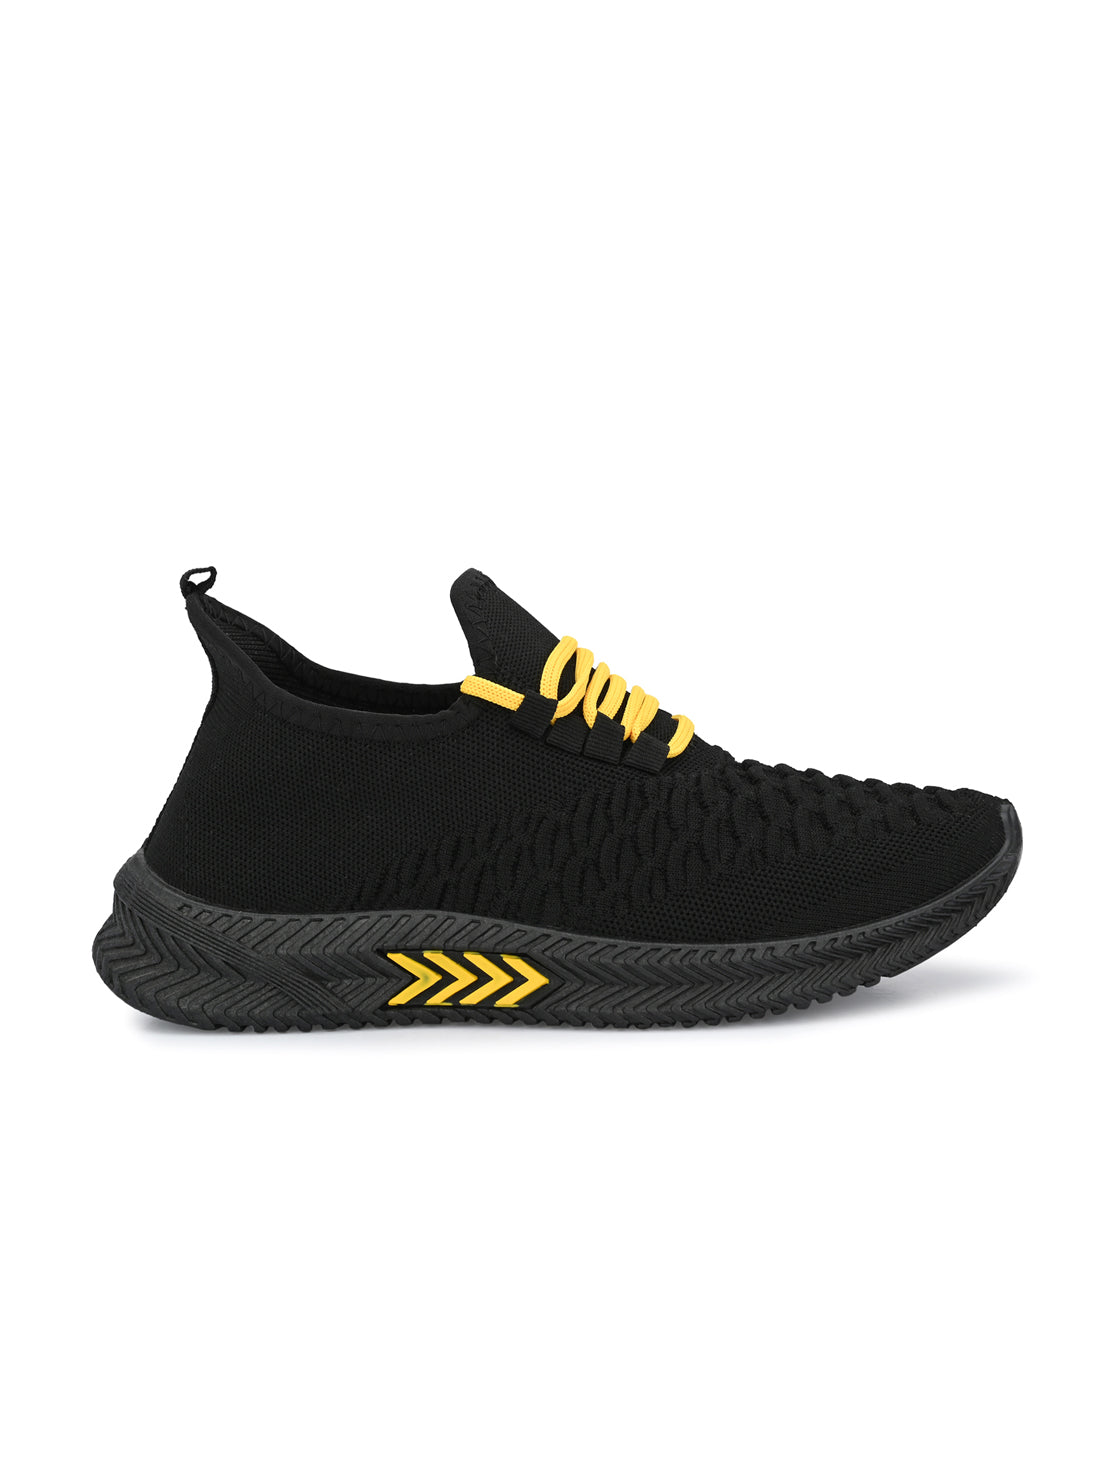 Hirolas® Men's Athleisure Black Knitted Lace-Up Sports Shoes